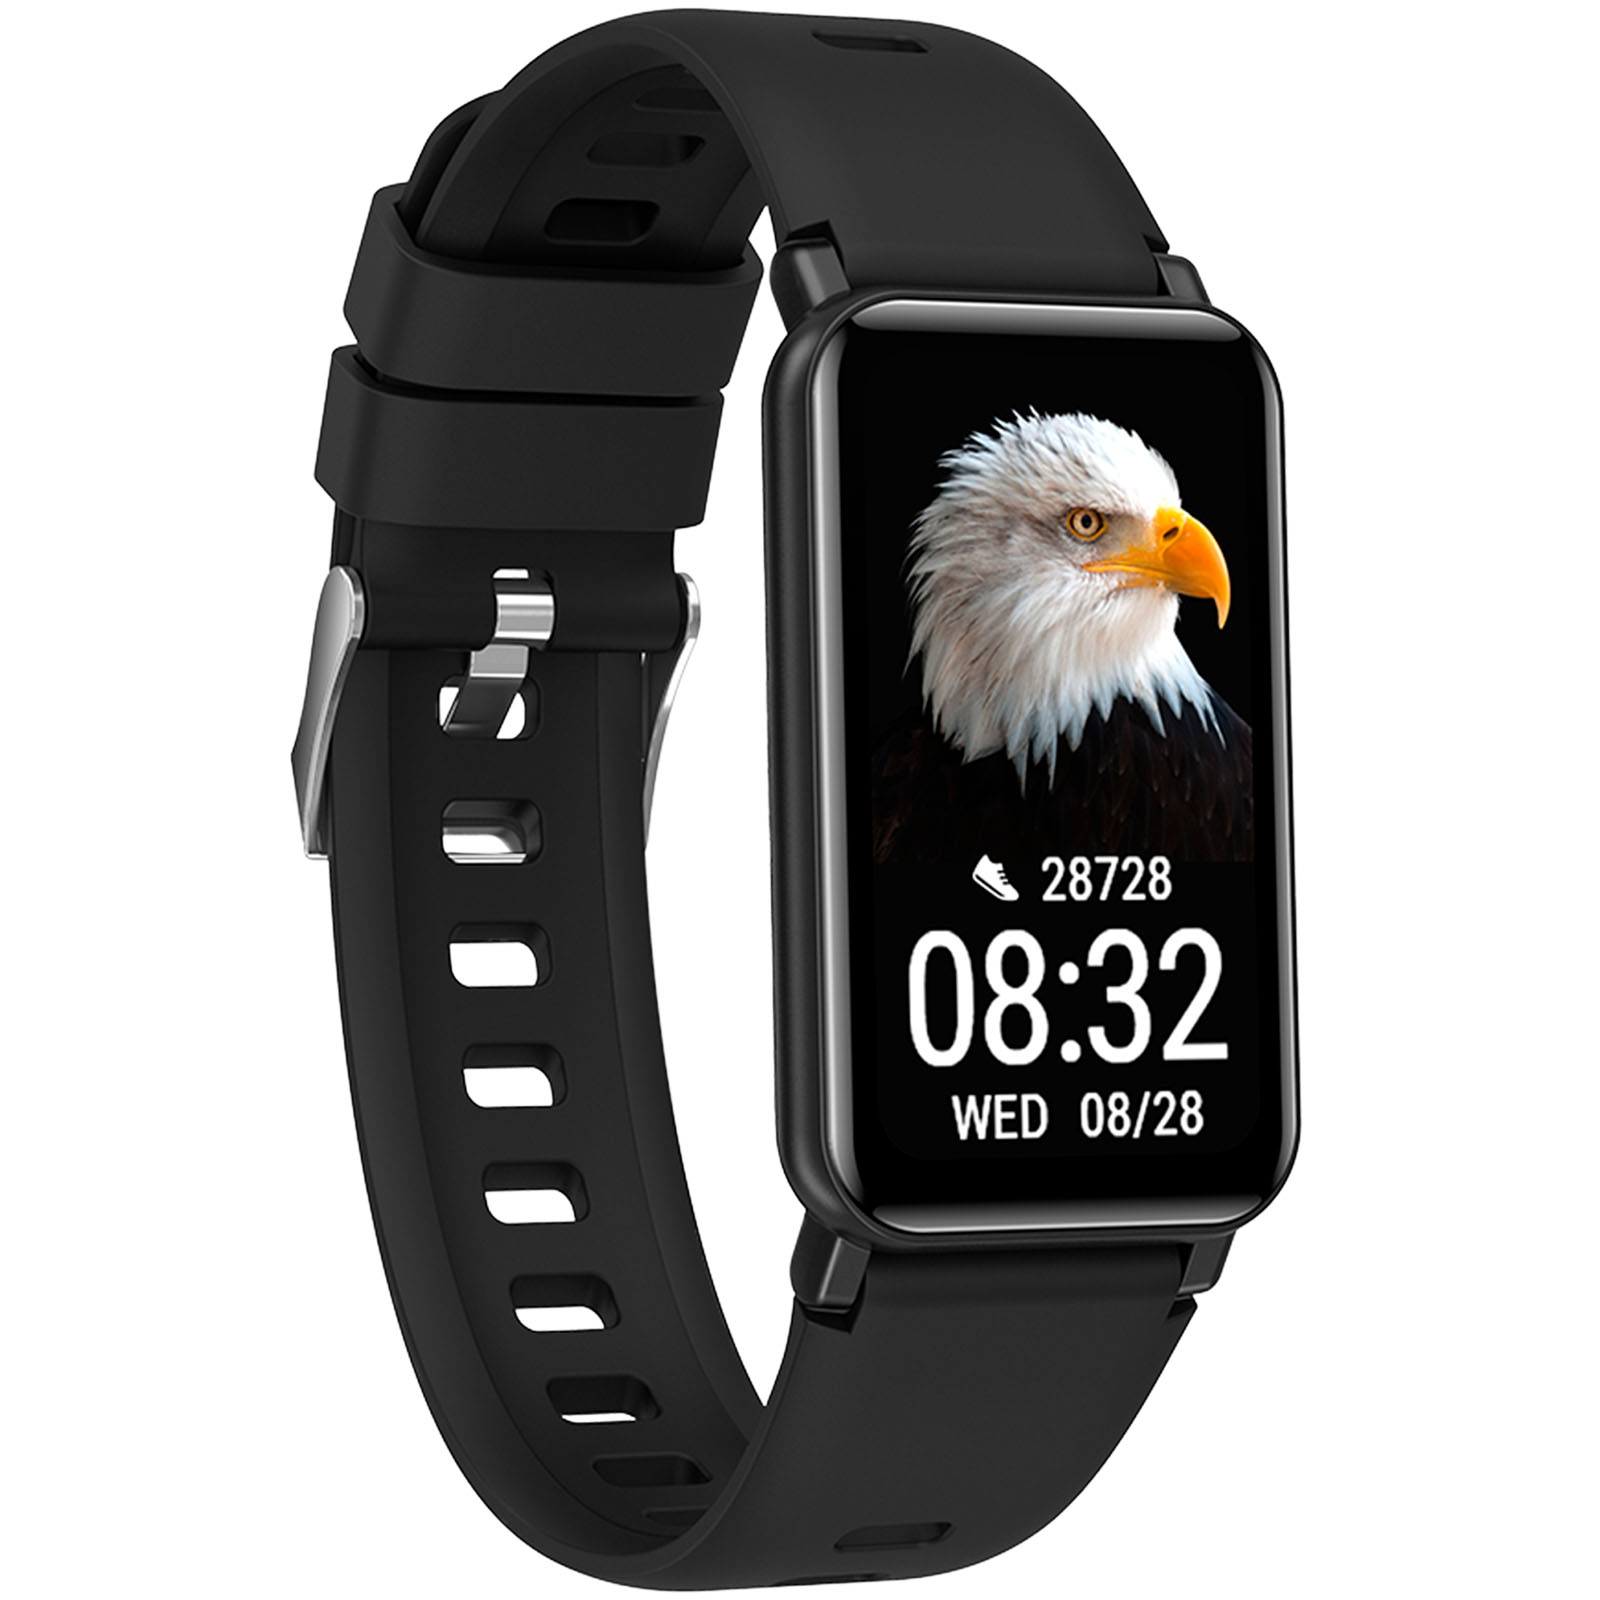 Advertising Smartwatches - Prixton AT806 multisport smartband with GPS - 2